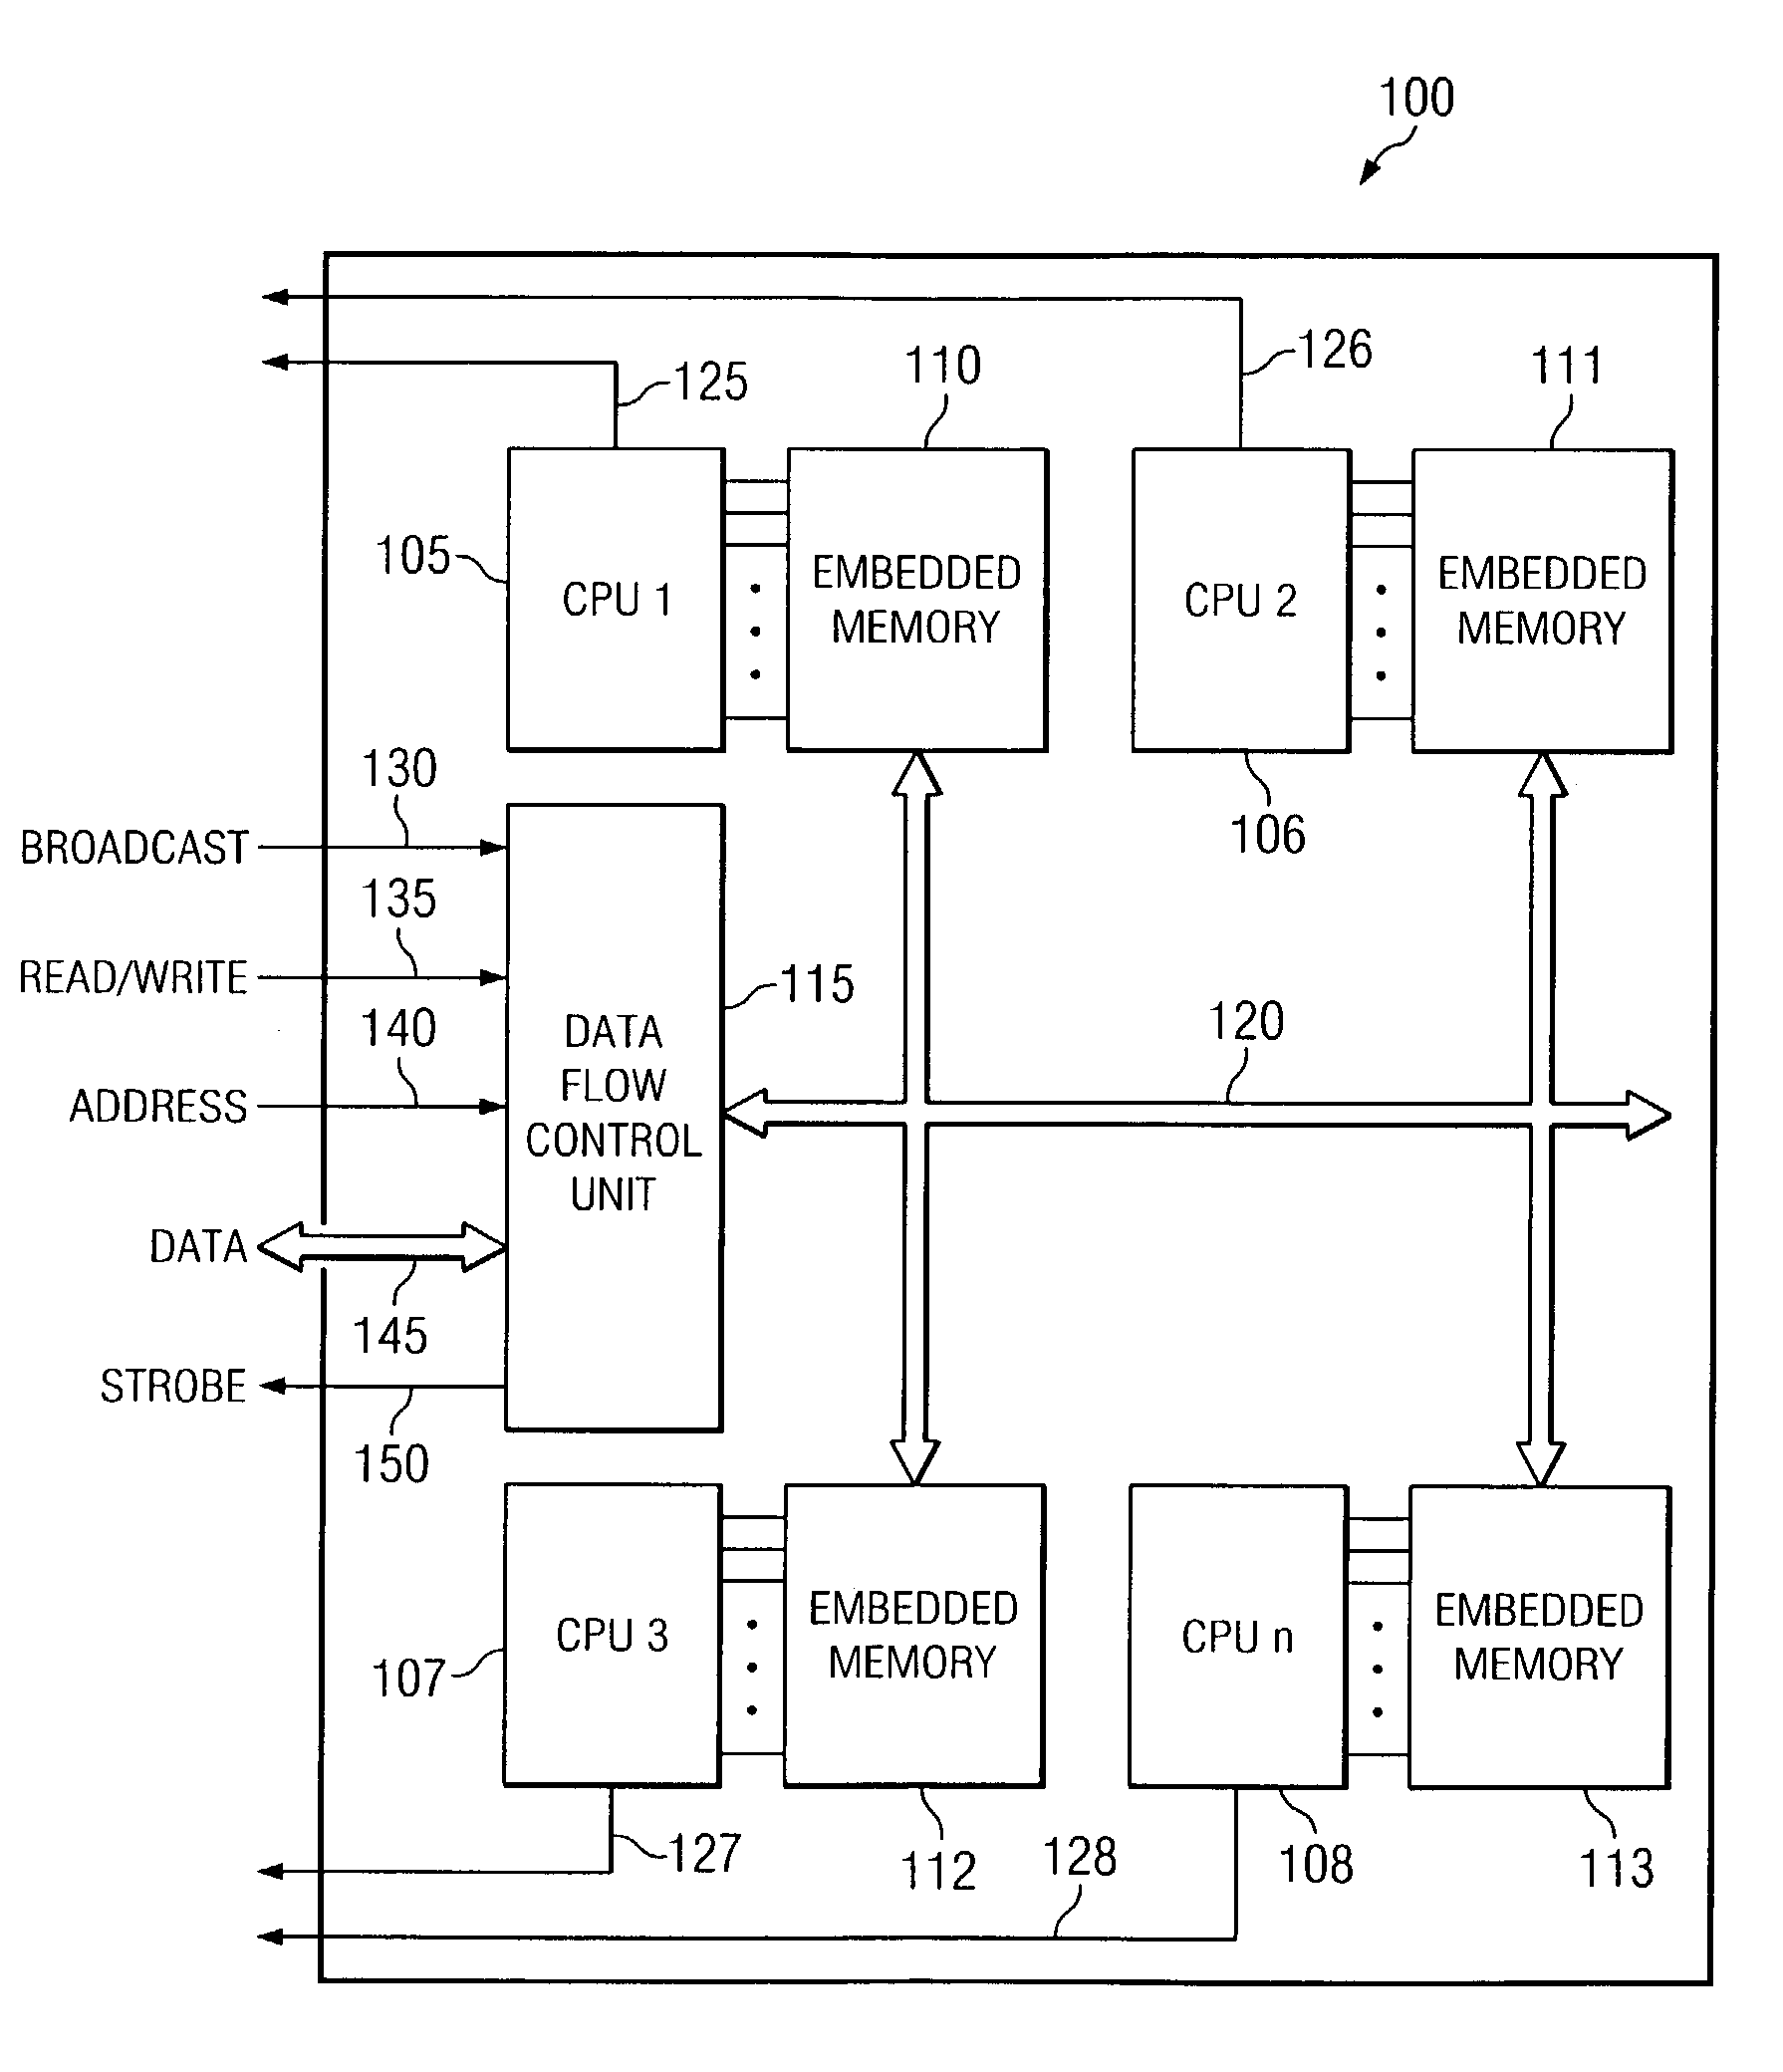 Method and apparatus for testing embedded memory on devices with multiple processor cores